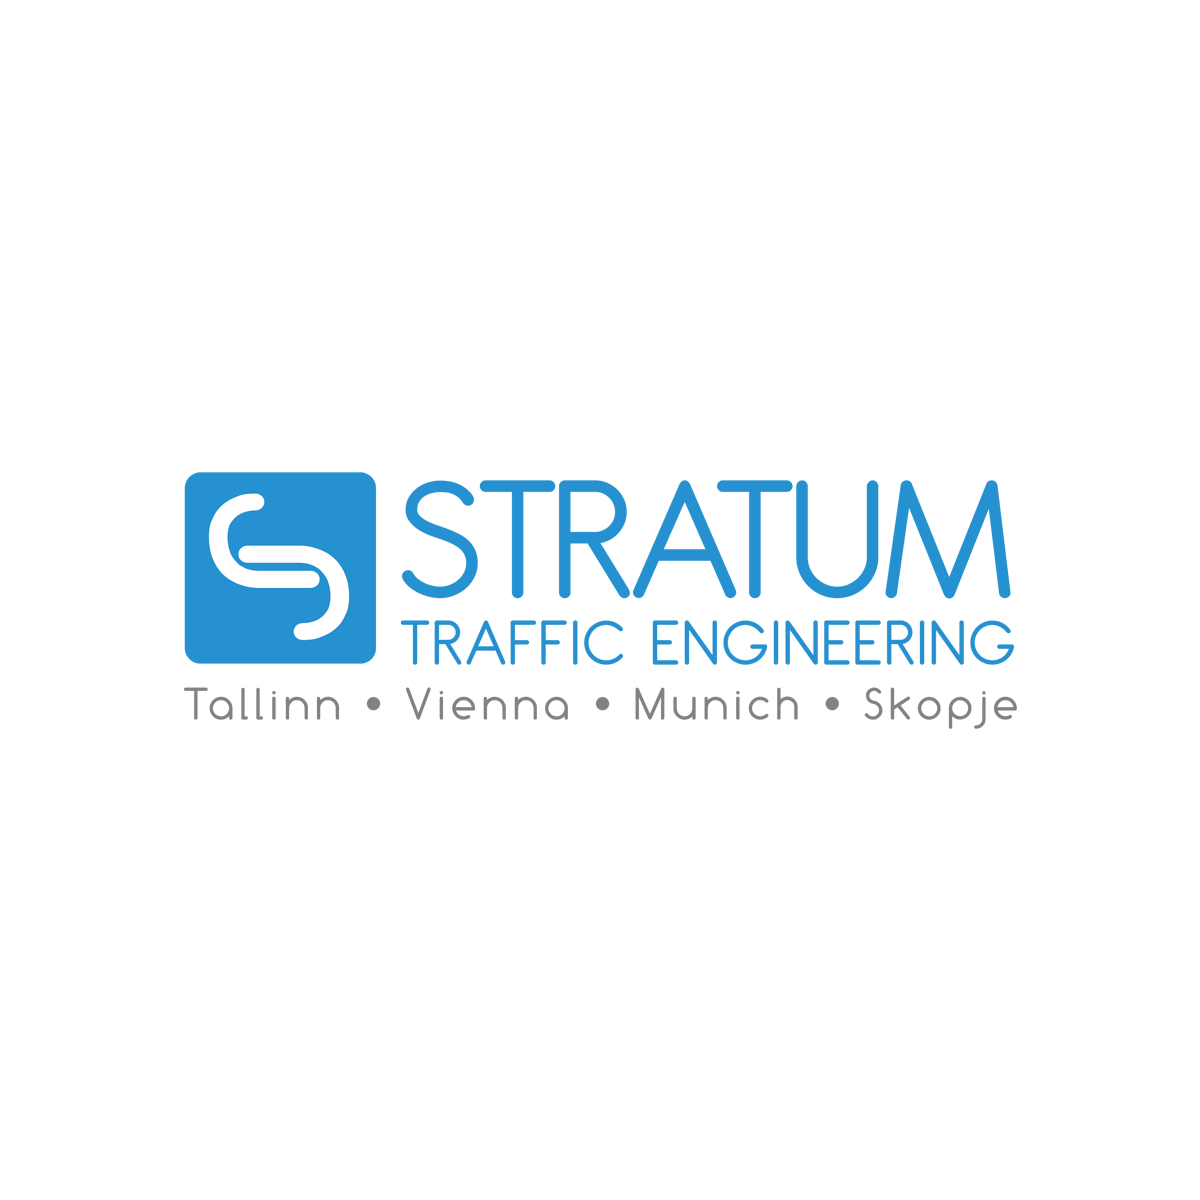 STRATUM Launches Its New Website